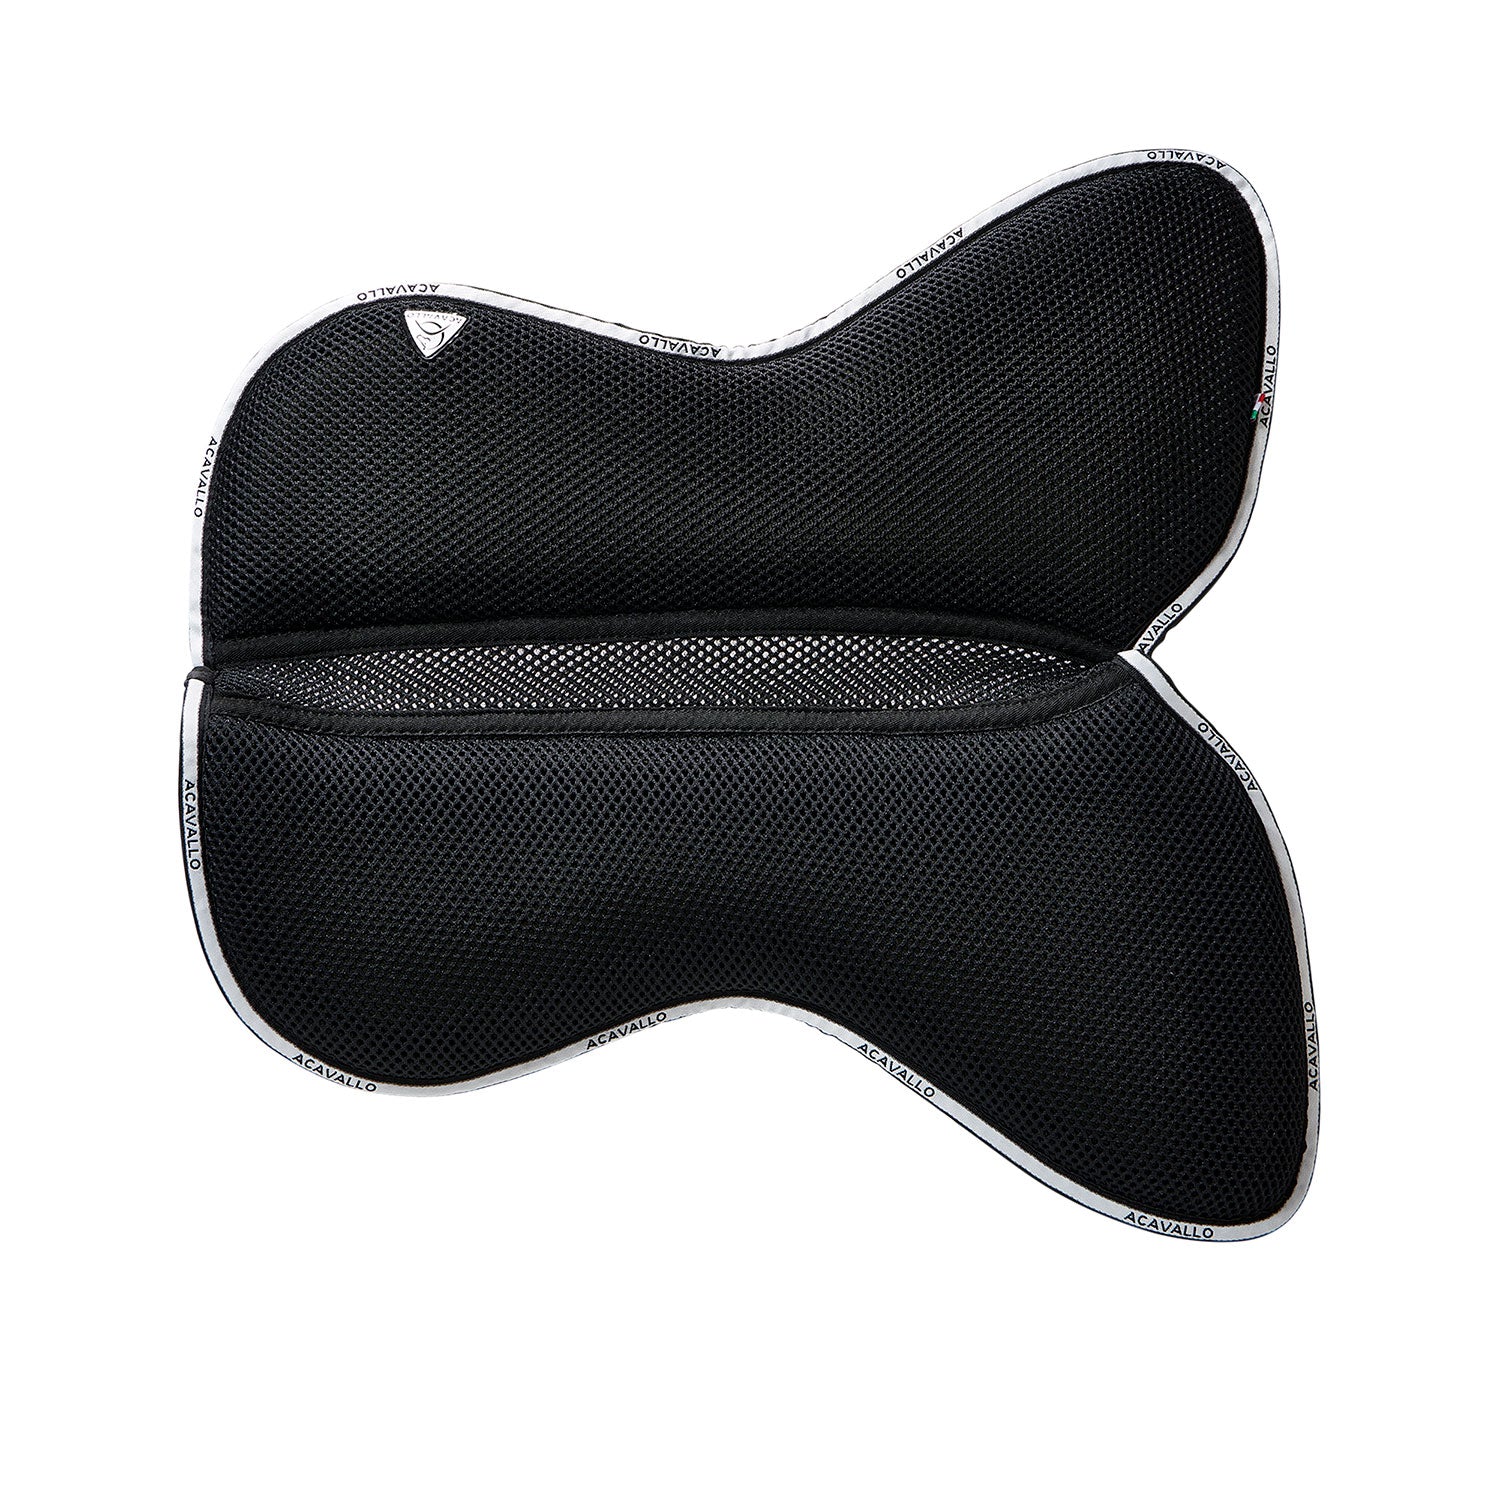 Pad Withers shaped spine free jumping pad 3D spacer - Reitstiefel Kandel - Dein Reitshop